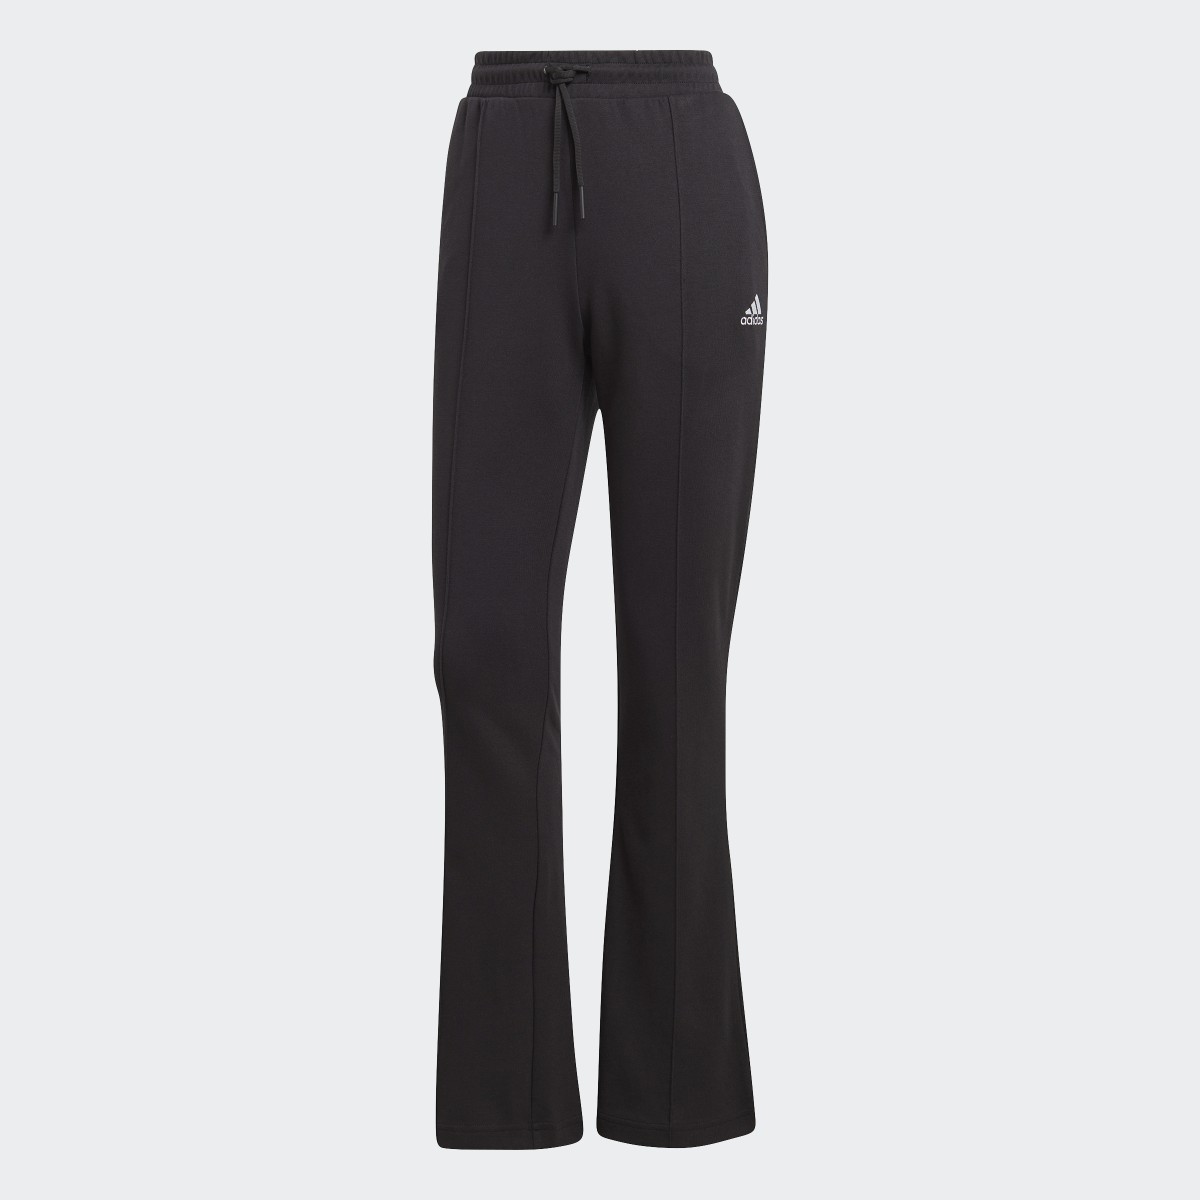 Adidas Allover adidas Graphic High-Rise Flare Pants. 4